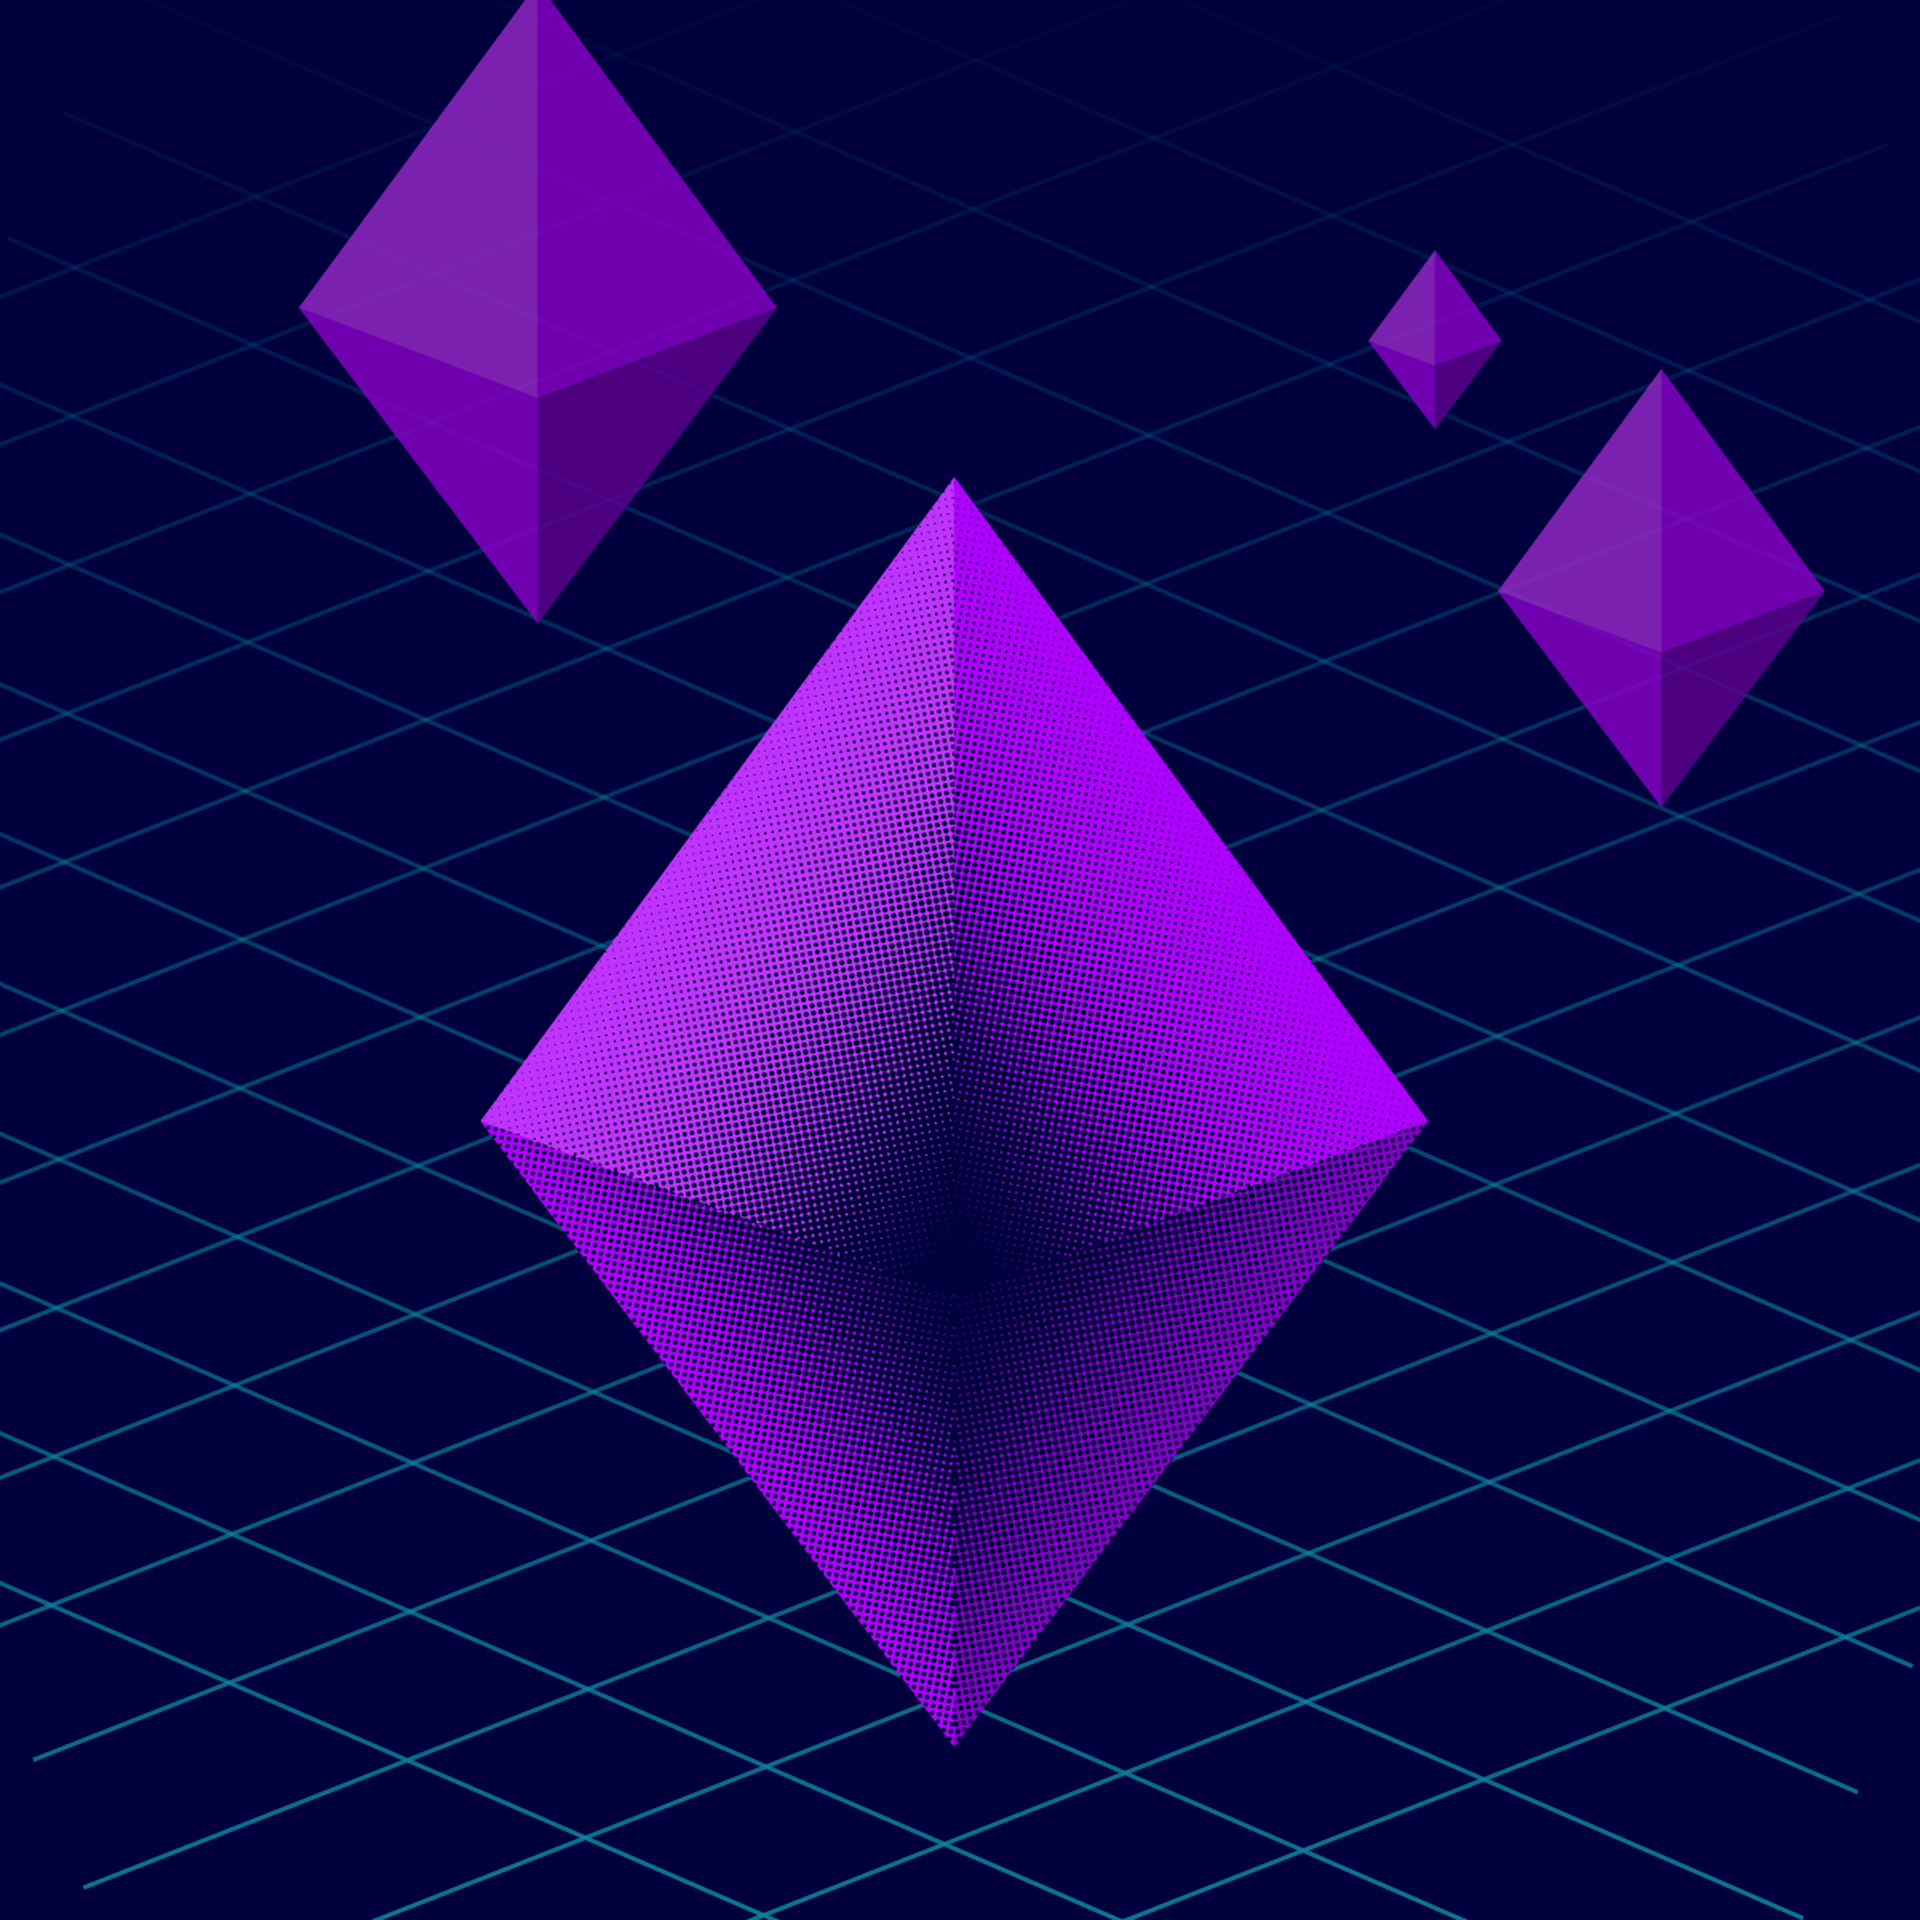 Visualisation of a Dither Shader, a purple 3D rhombus